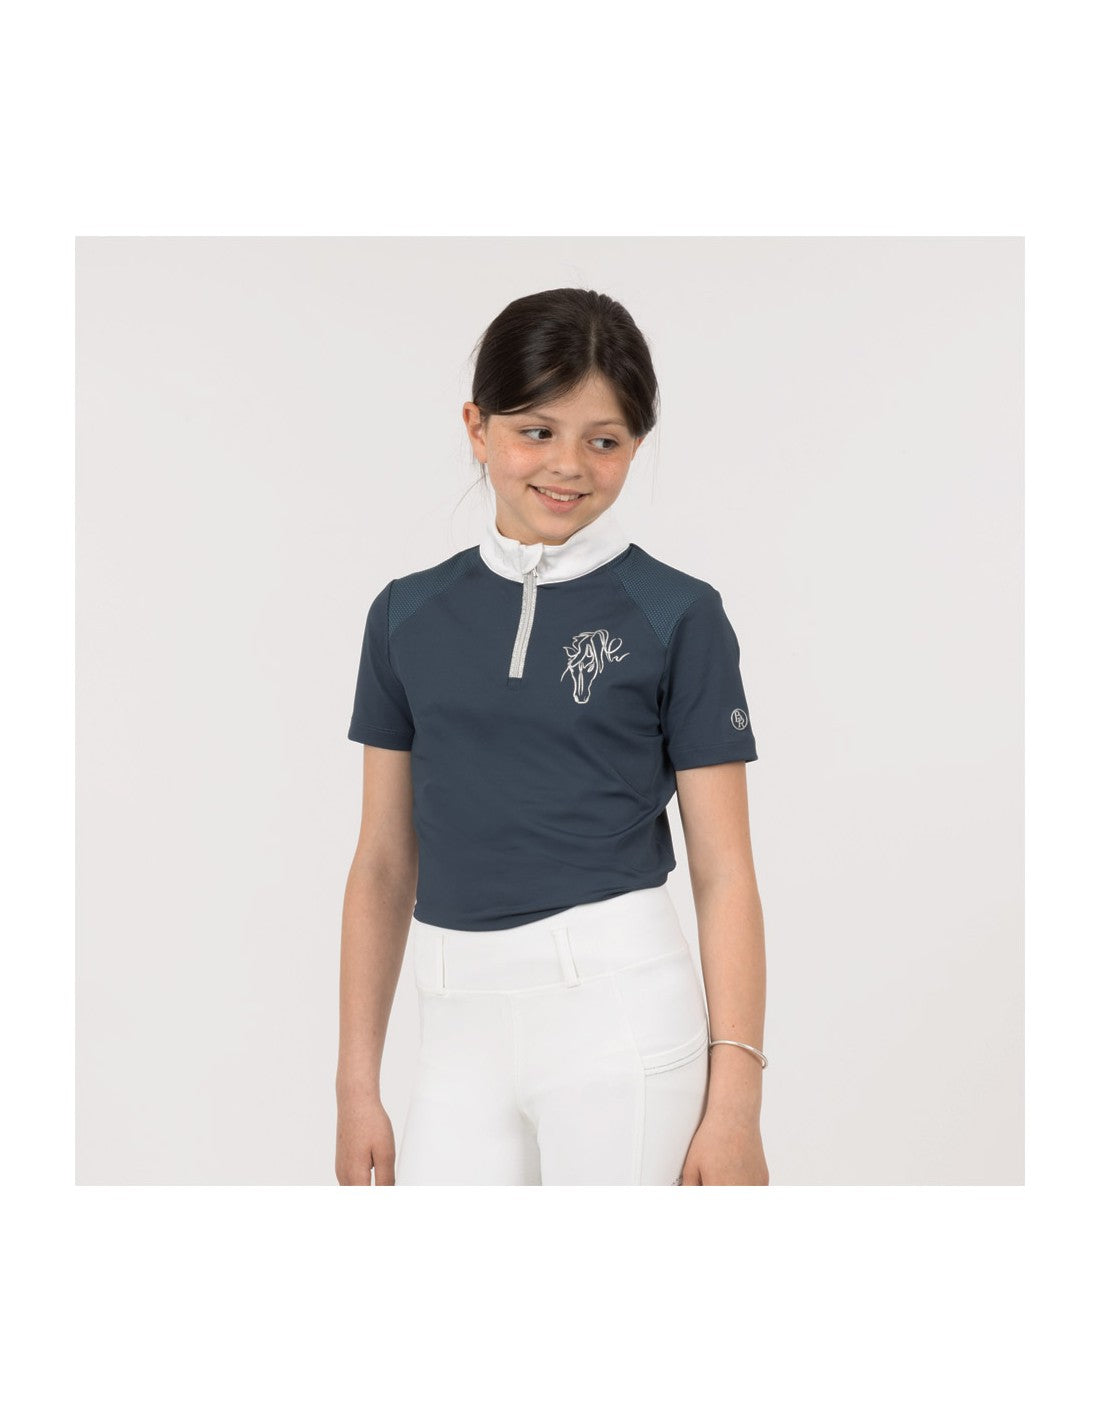 BR Cathy Children's Competition Shirt - Navy